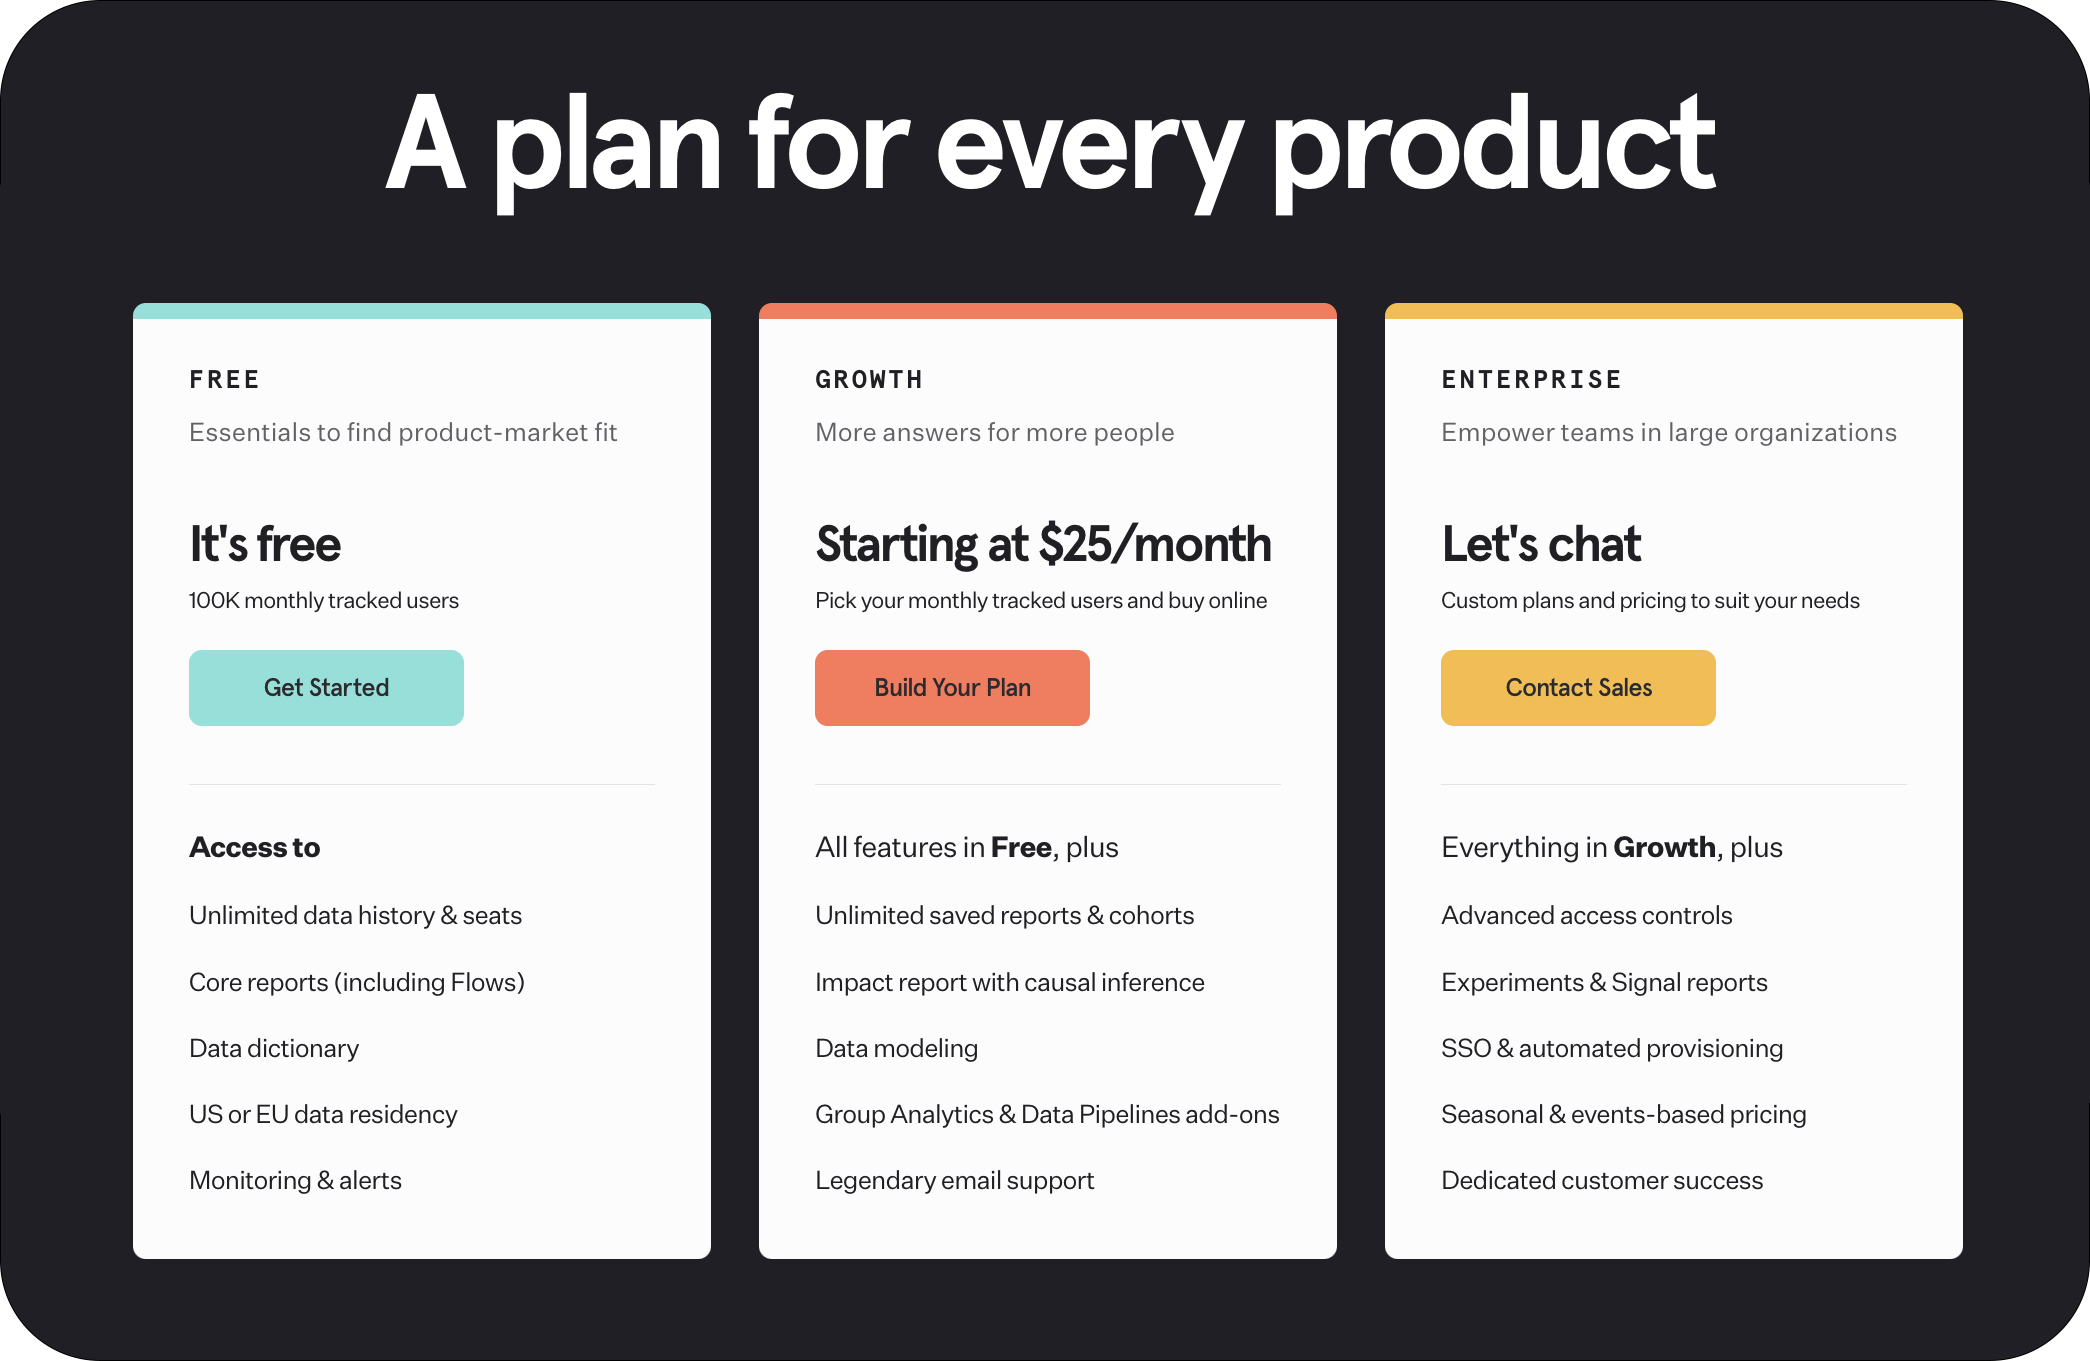 A graphic showing Mixpanel's Free, Growth, and Enterprise plans, with details